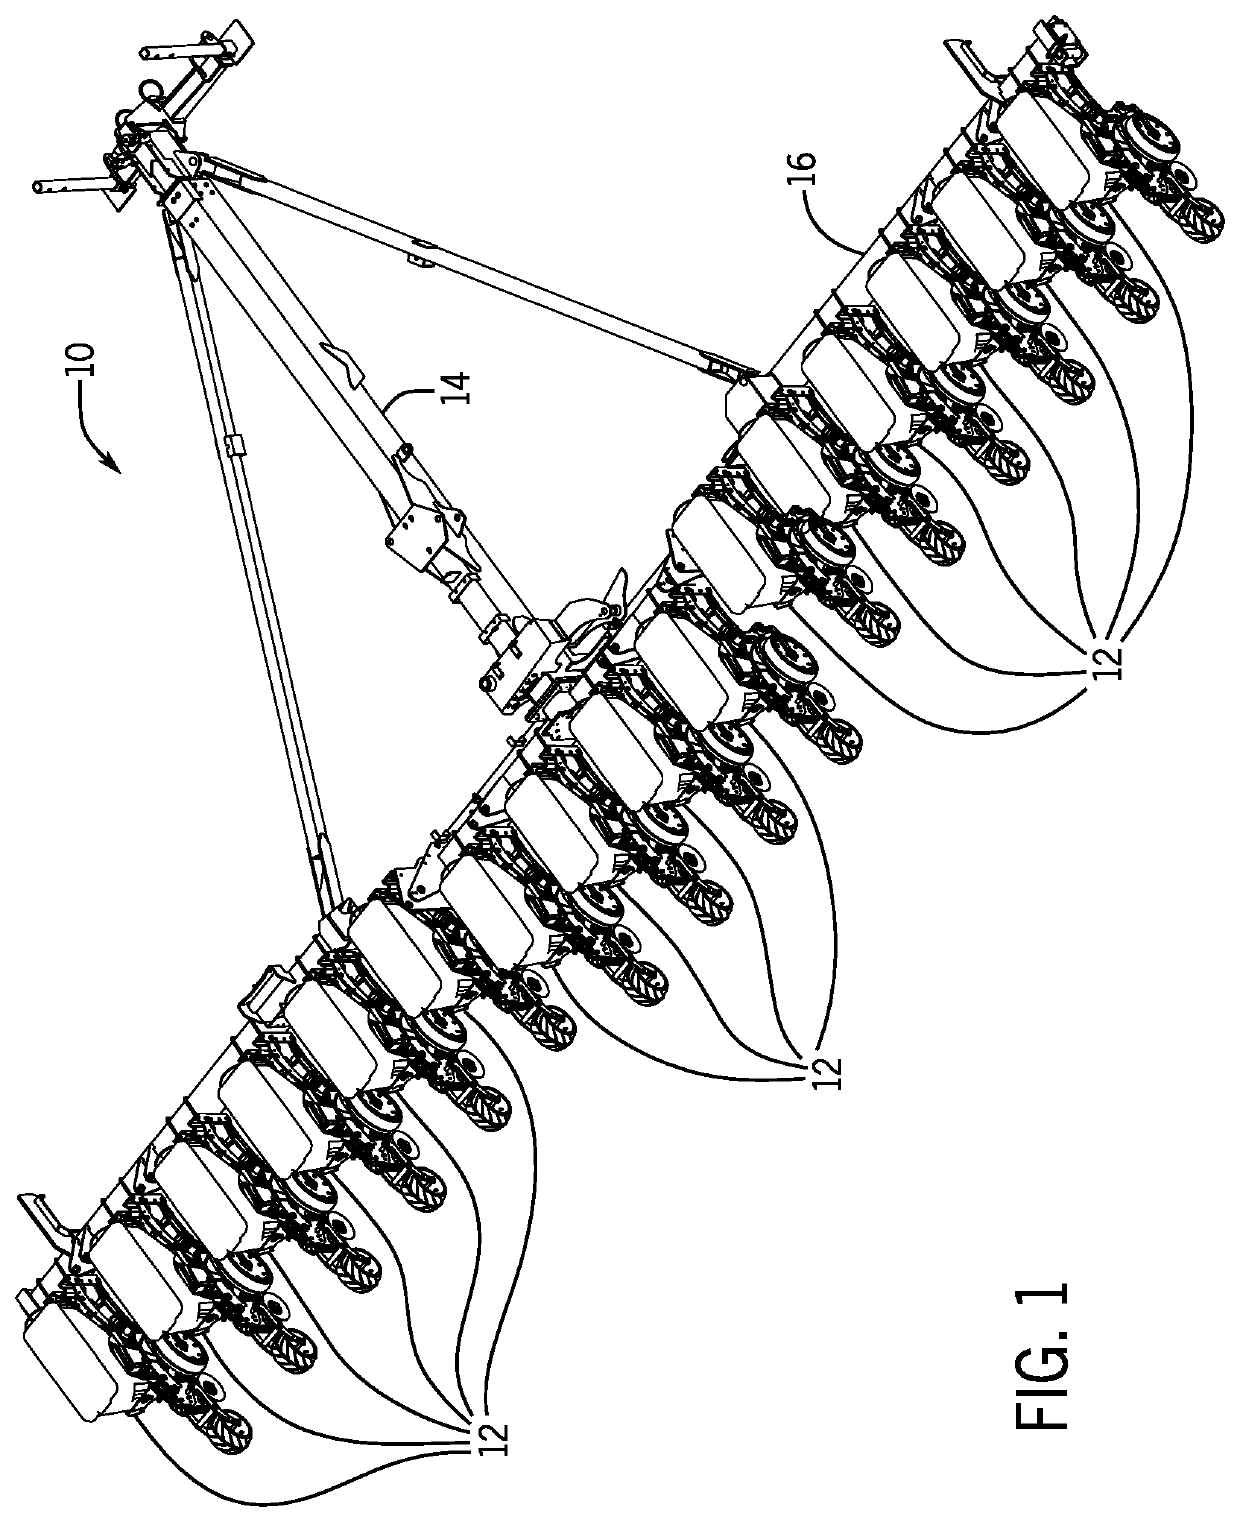 Particle delivery system of an agricultural row unit